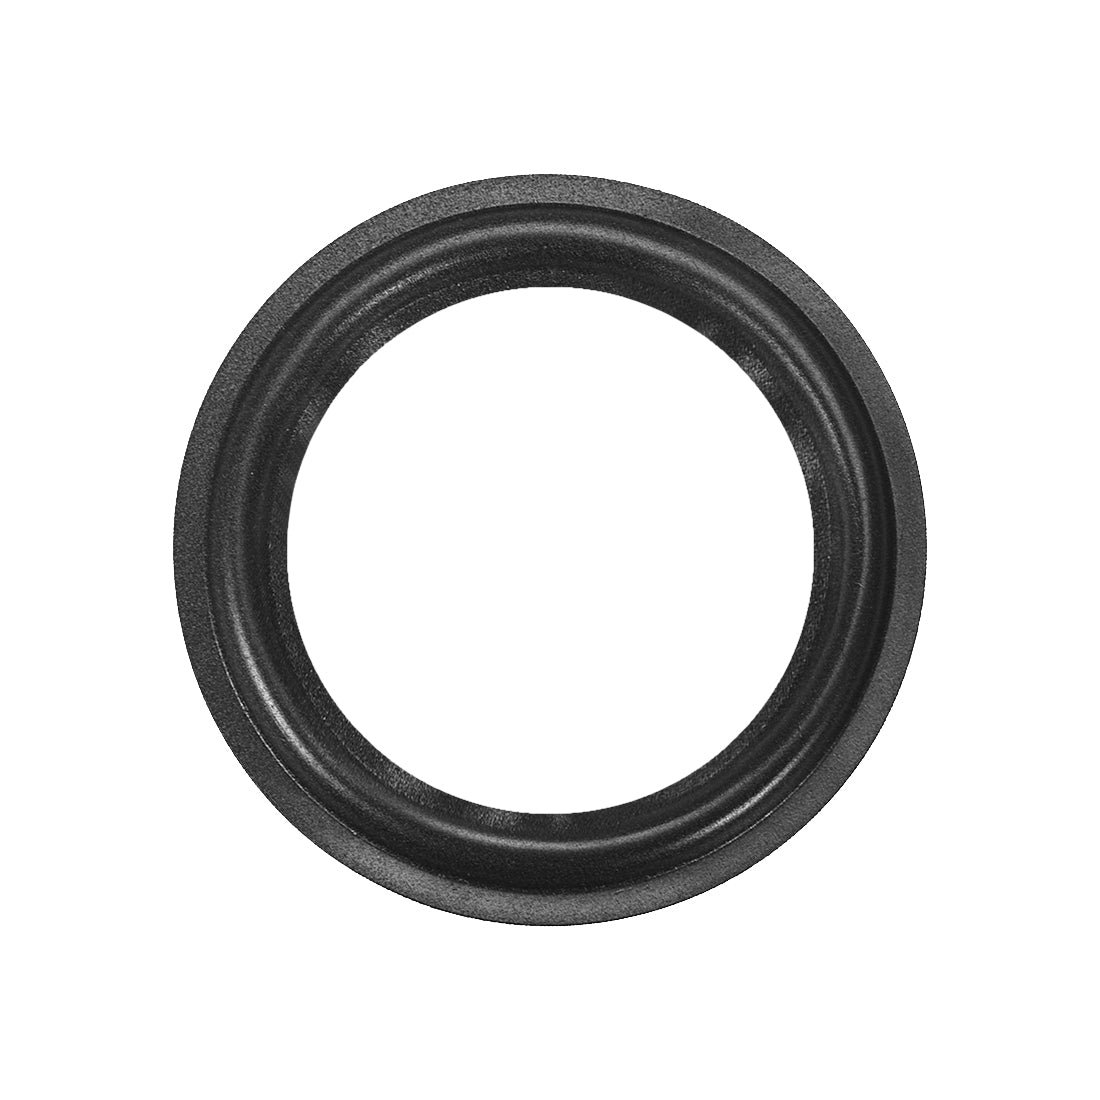 uxcell Uxcell 5"Inch Speaker Foam Edge Folding Ring  Horn Replacement Parts for Speaker Black